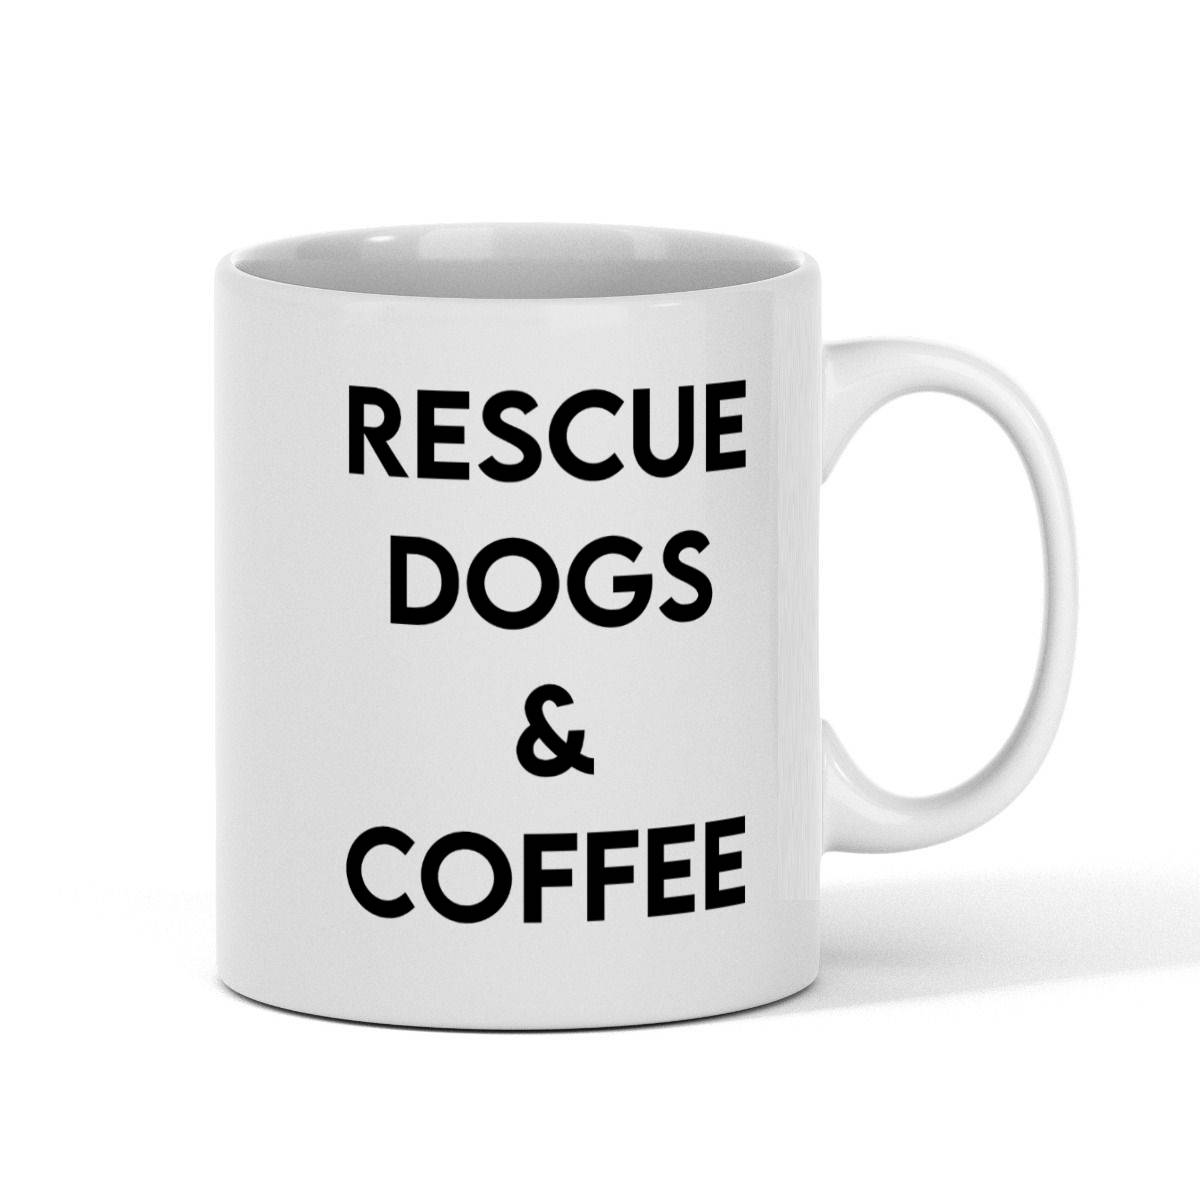 Rescue Dogs and Coffee Mug